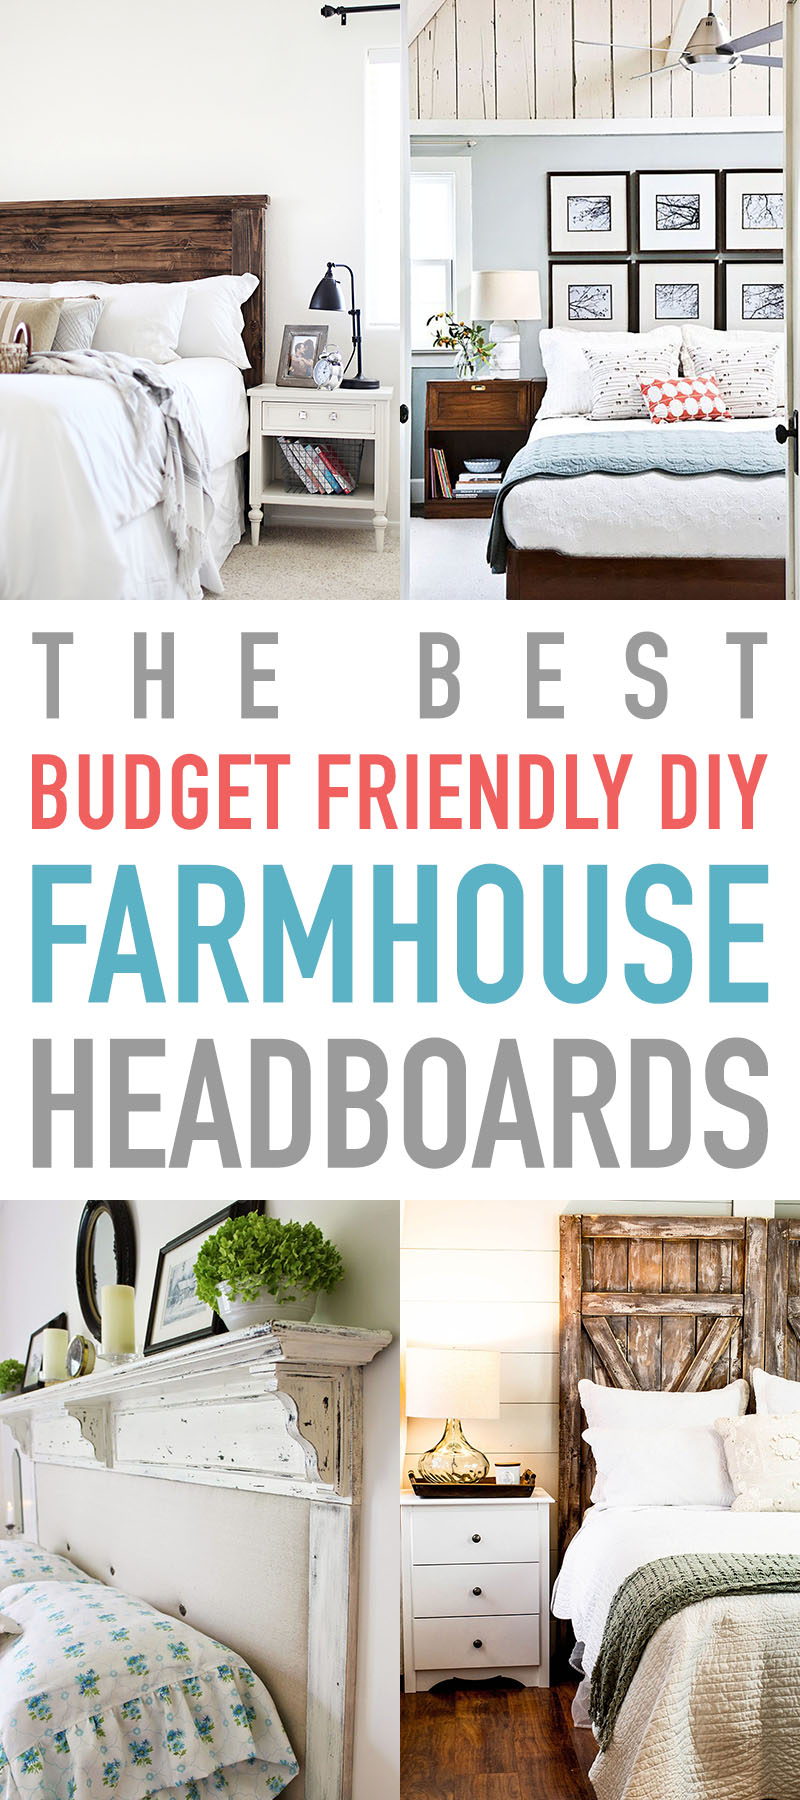 The Best Budget Friendly DIY Farmhouse Headboards are waiting for you to check out!  They are fabulous and all so doable and affordable!